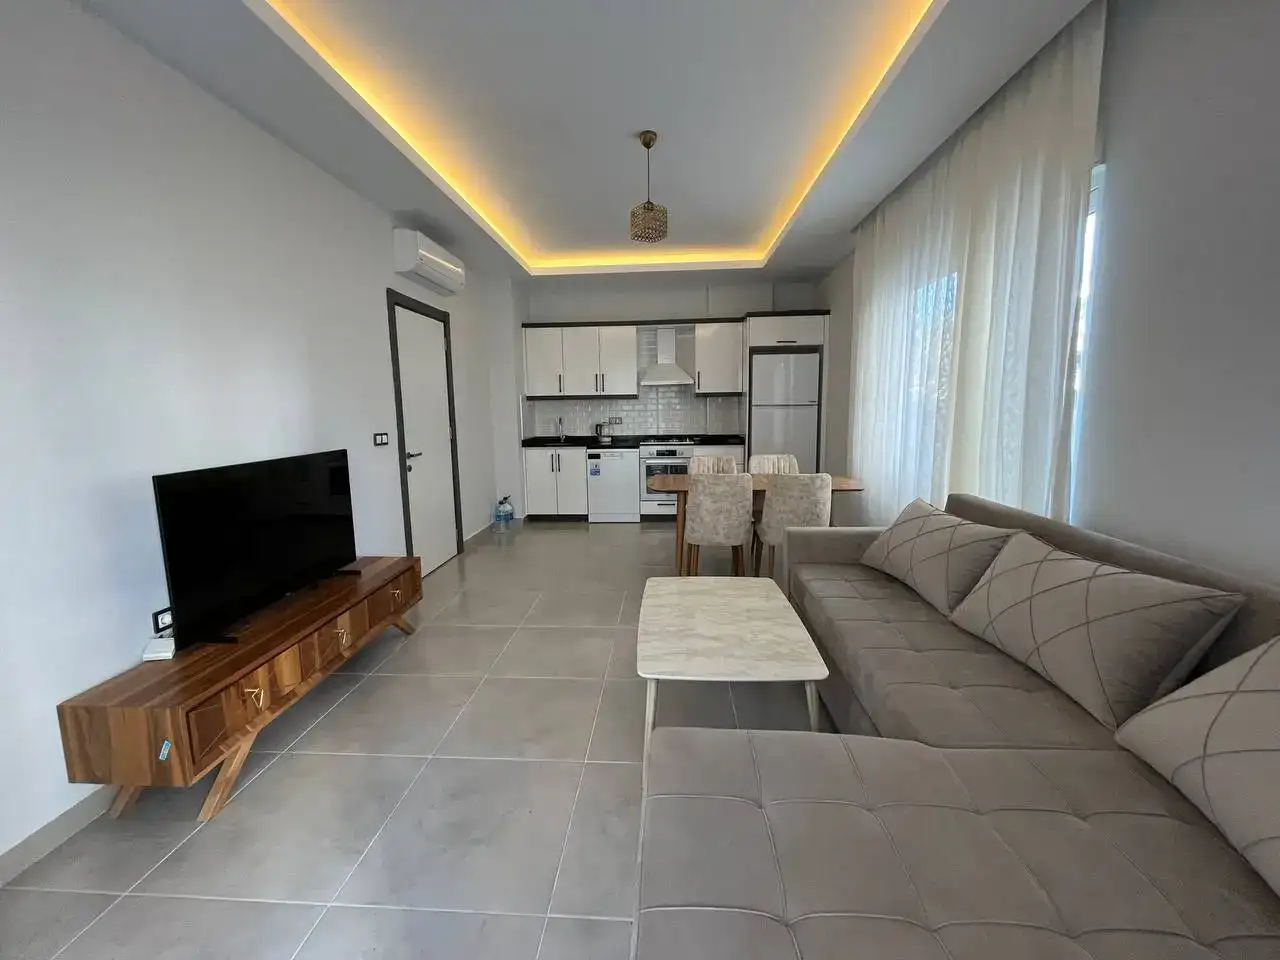 APARTMENT FOR SALE IN MAHMUTLAR - FULLY FURNISHED 1+1